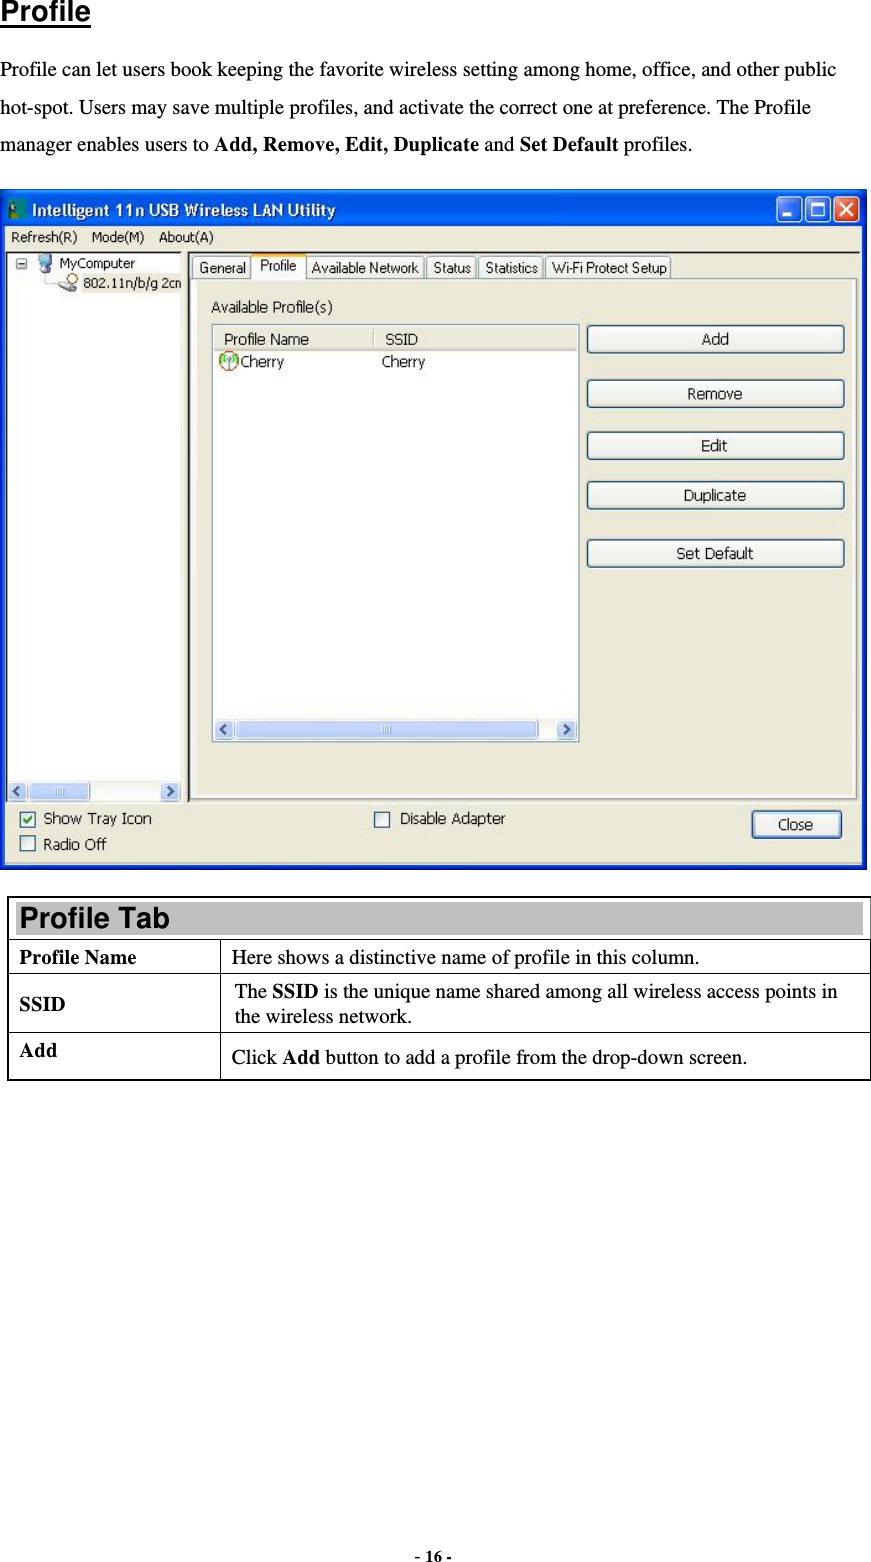  - 16 - Profile Profile can let users book keeping the favorite wireless setting among home, office, and other public hot-spot. Users may save multiple profiles, and activate the correct one at preference. The Profile manager enables users to Add, Remove, Edit, Duplicate and Set Default profiles.  Profile Tab Profile Name  Here shows a distinctive name of profile in this column. SSID  The SSID is the unique name shared among all wireless access points in the wireless network. Add  Click Add button to add a profile from the drop-down screen. 